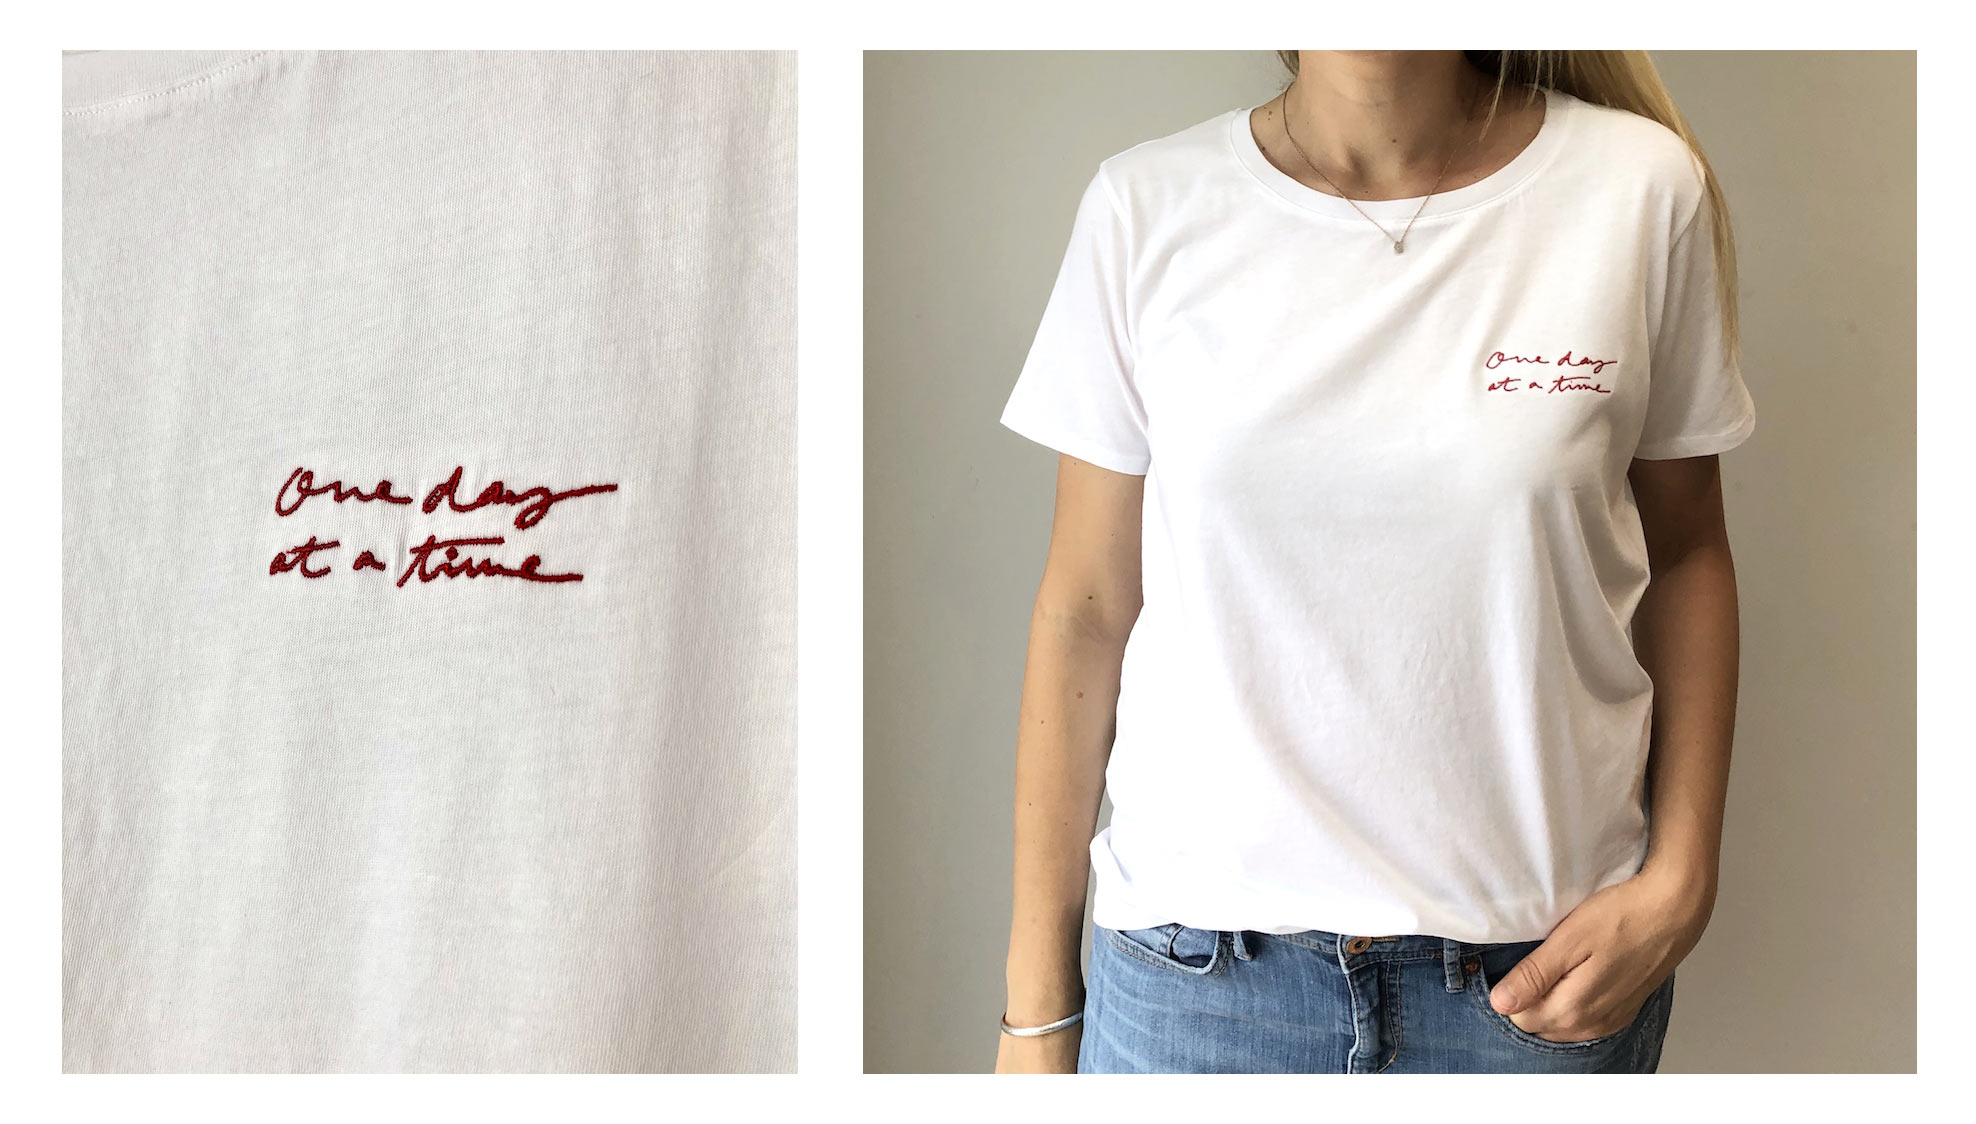 One Day at a time tee for Ivy x Little Village by Elly Jahnz